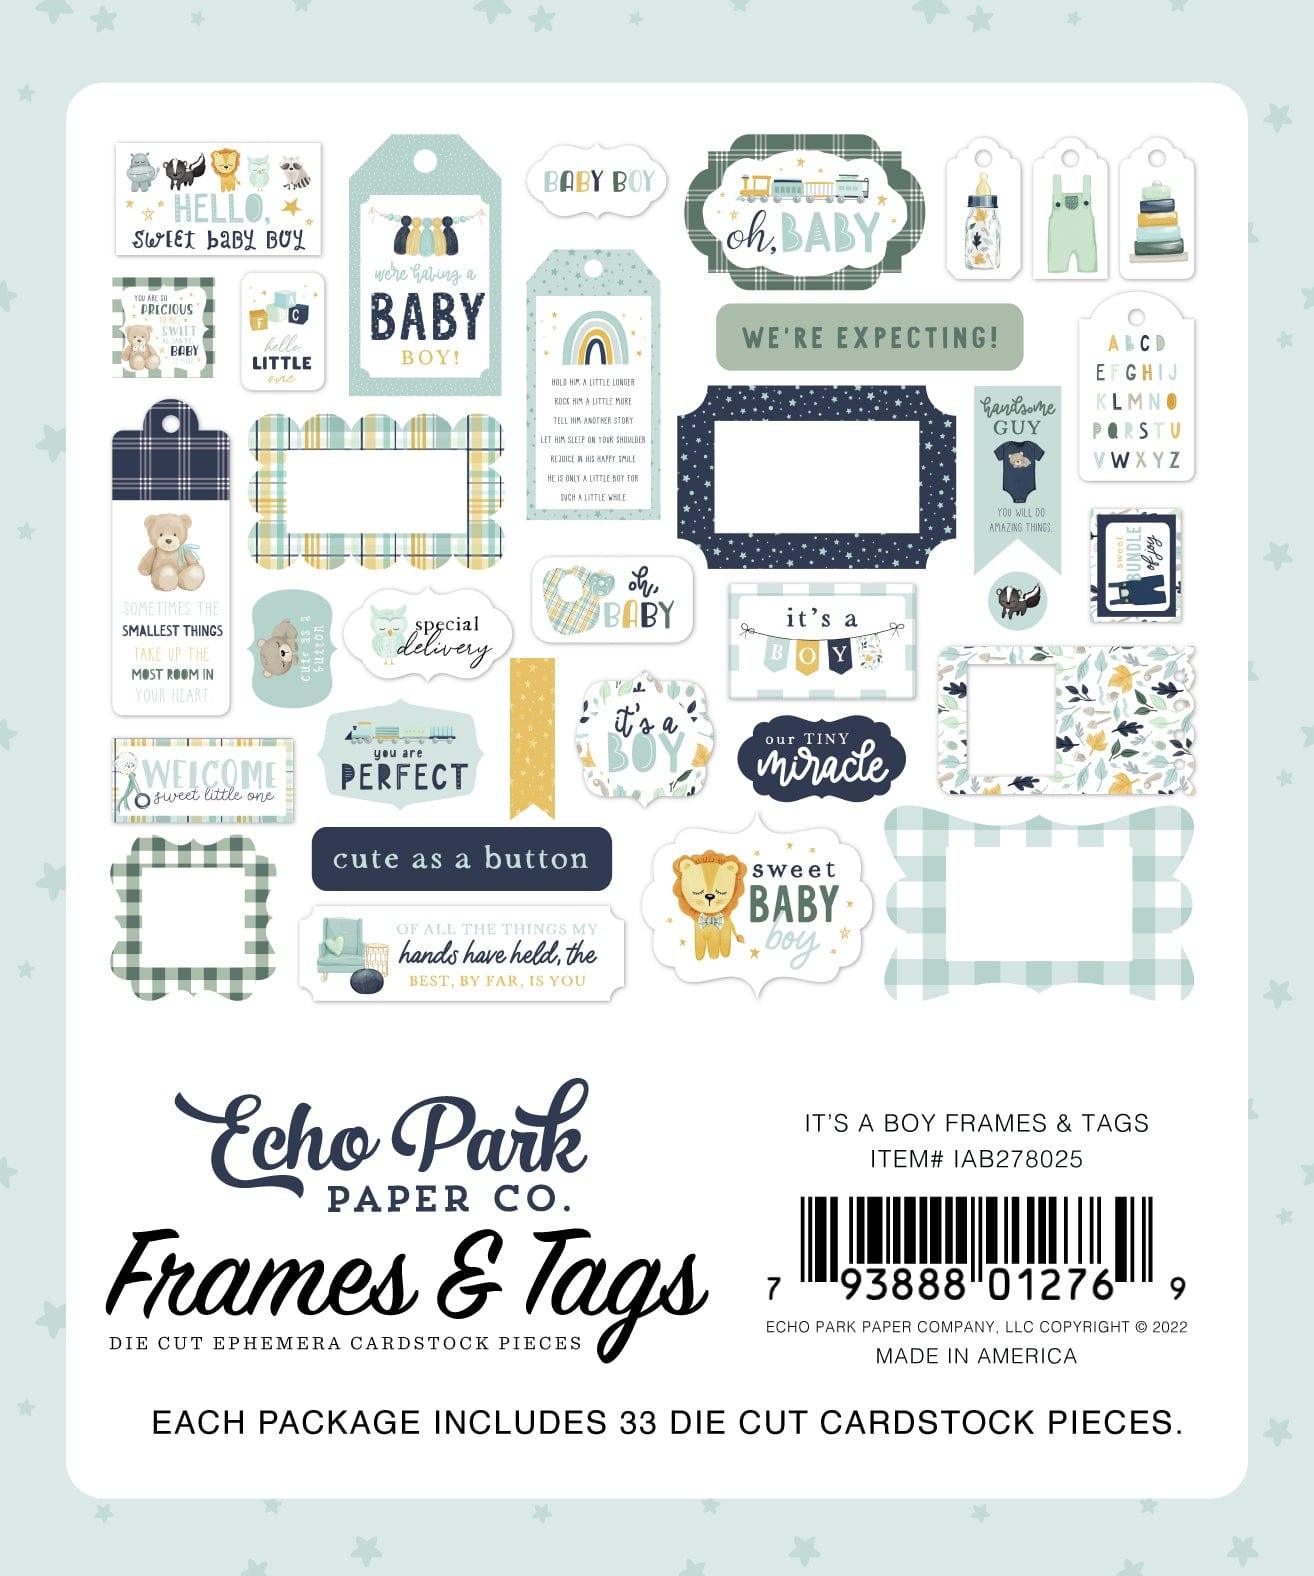 It's A Boy Collection 5 x 5 Scrapbook Tags & Frames Die Cuts by Echo Park Paper - Scrapbook Supply Companies